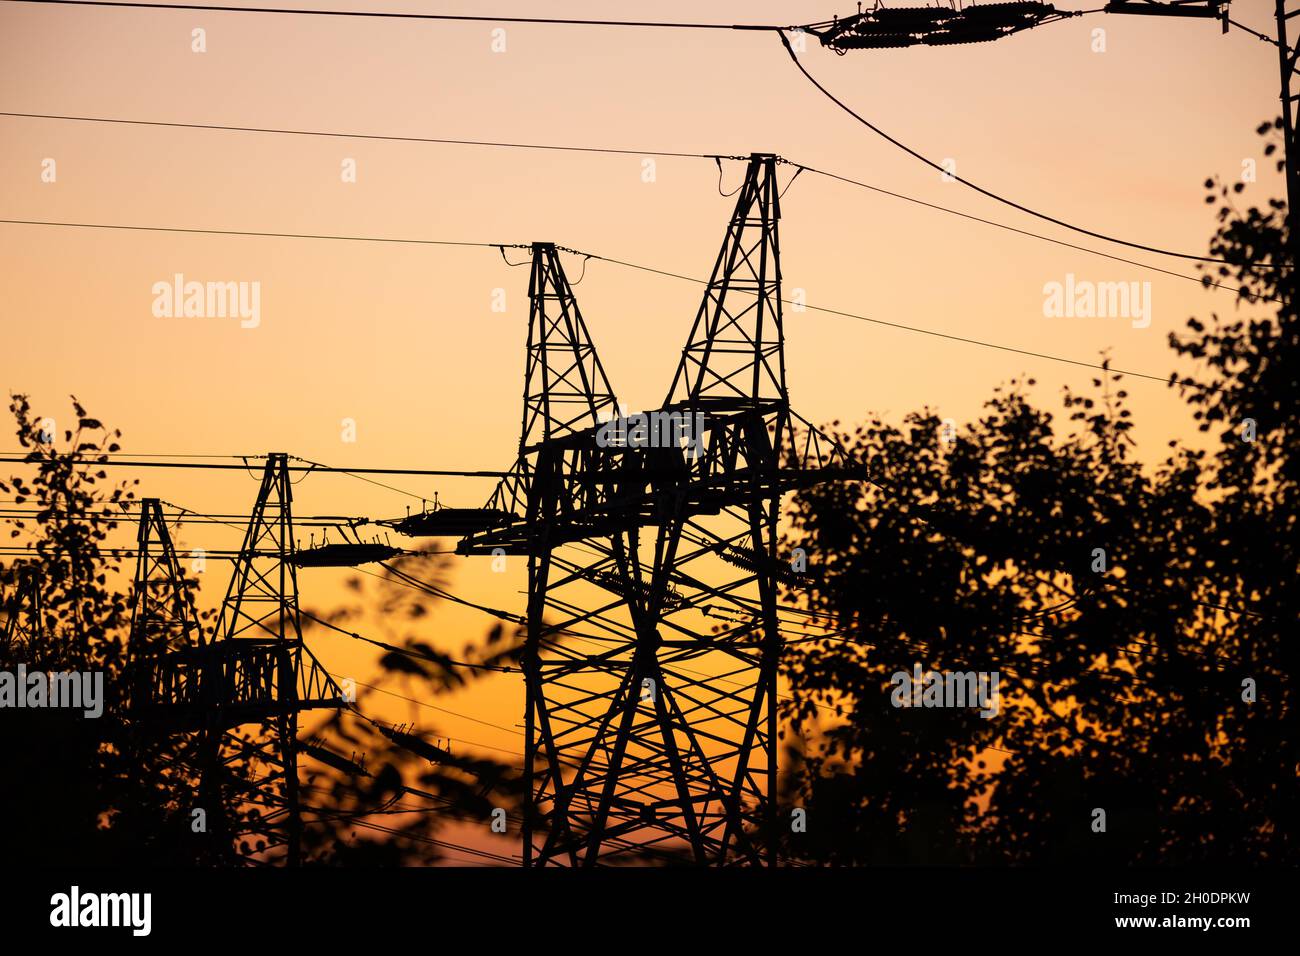 Silhouettes of high voltage pylons against the orange sky during sunset. Photo taken at dusk under natural lighting conditions Stock Photo